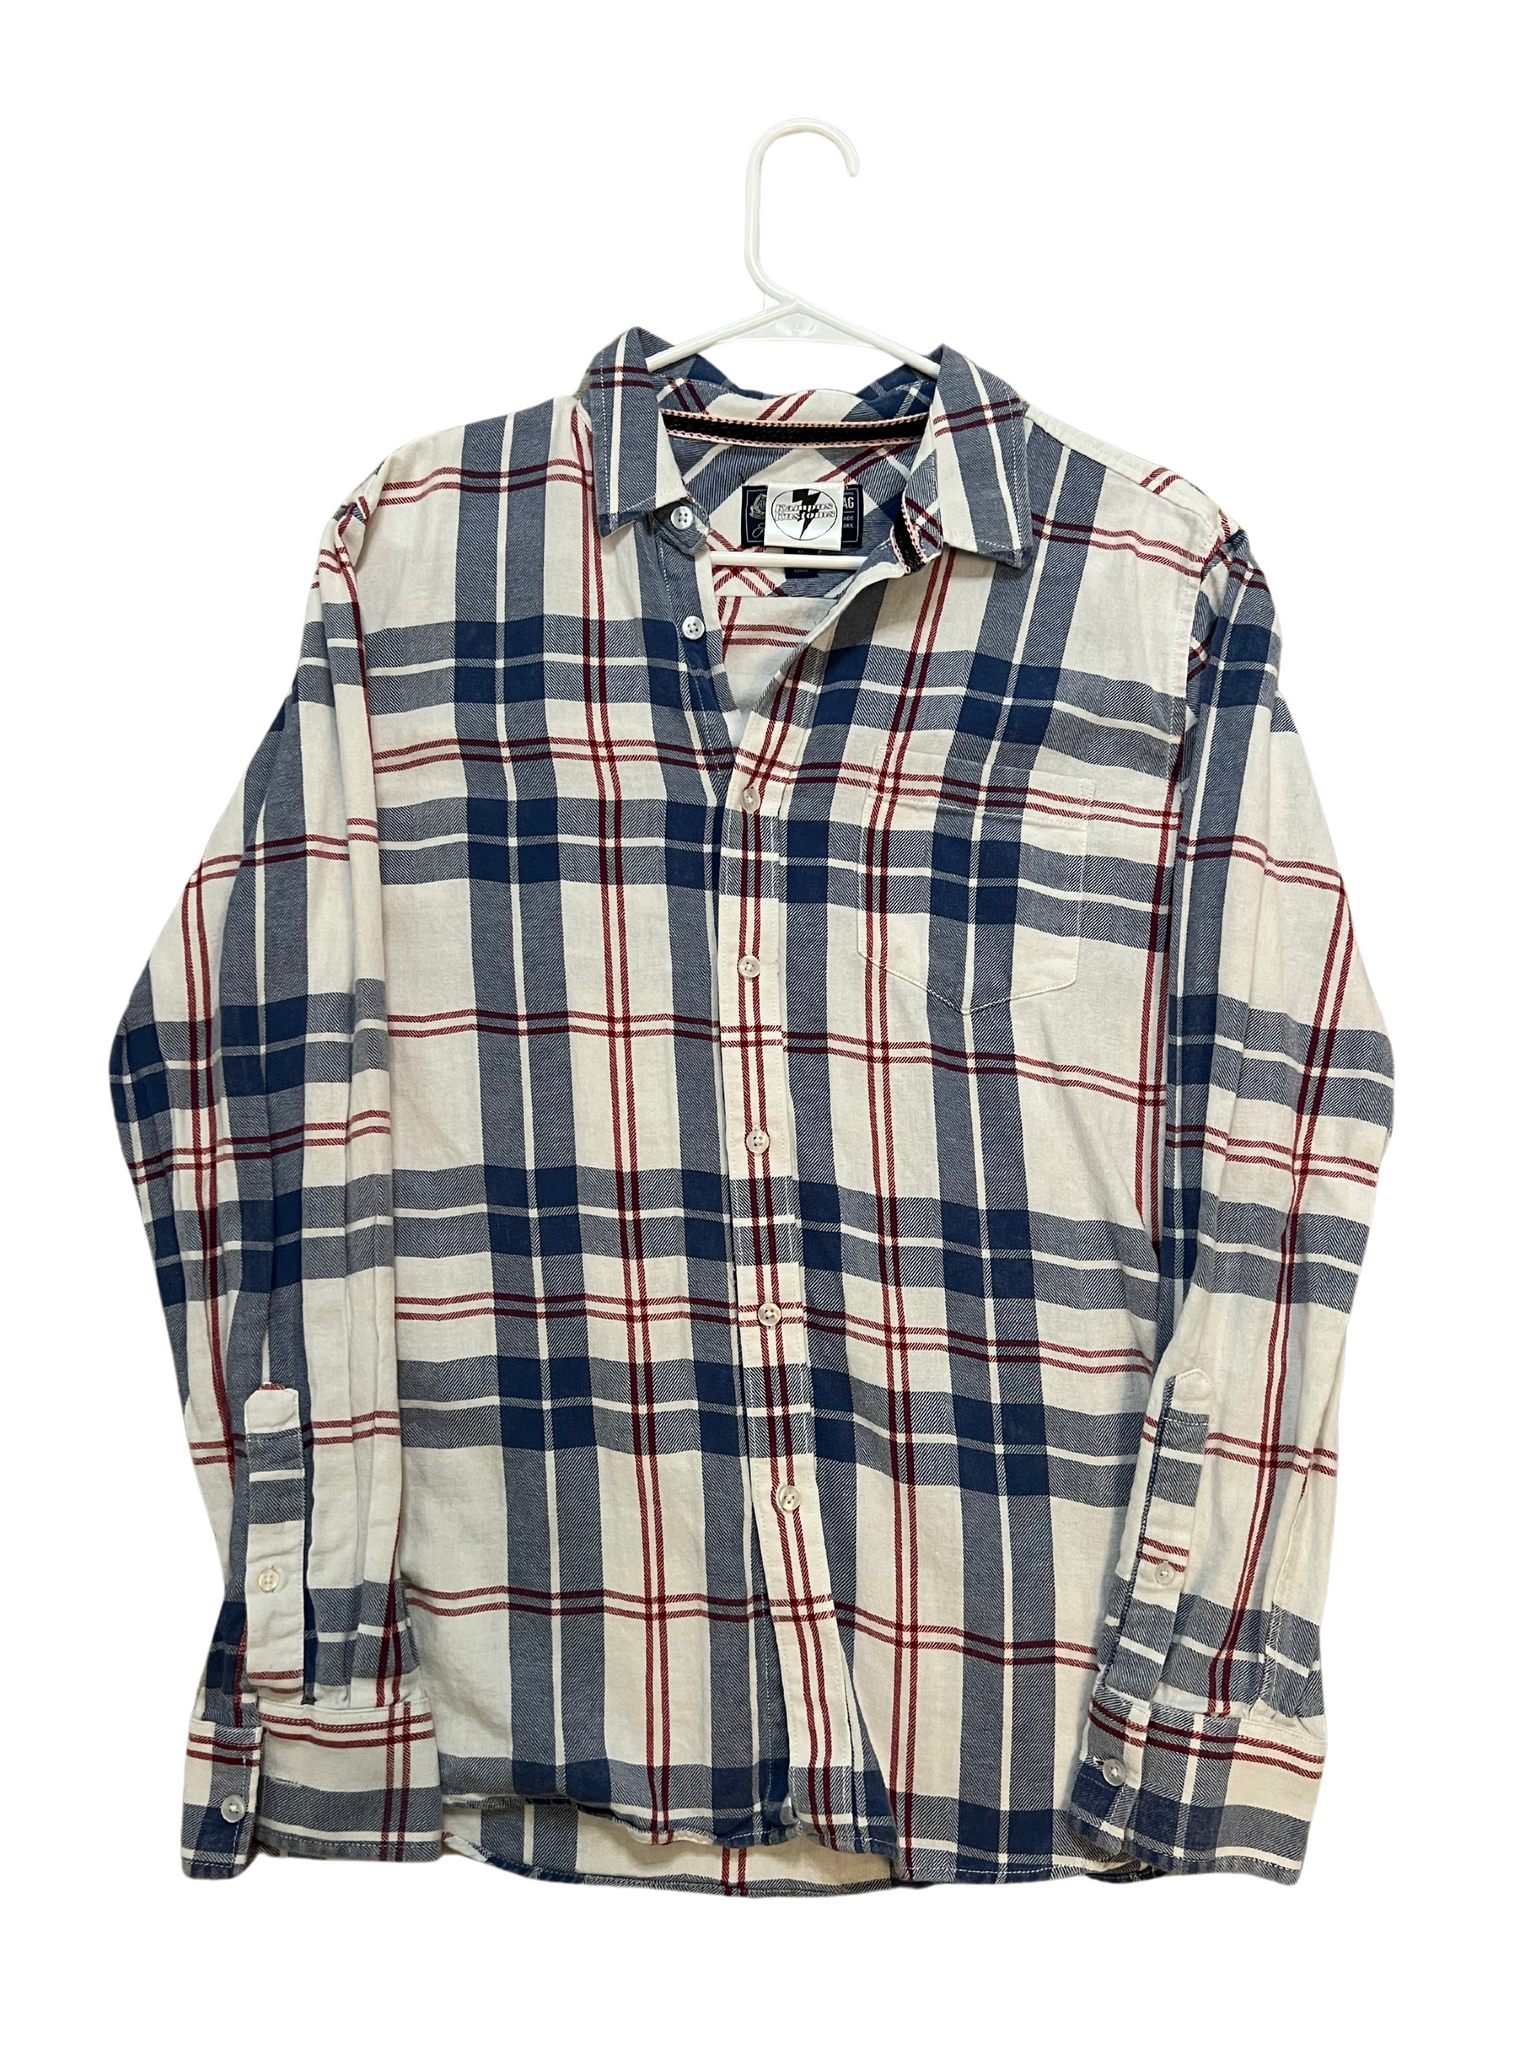 Chicago Cubs Flannel Shirt